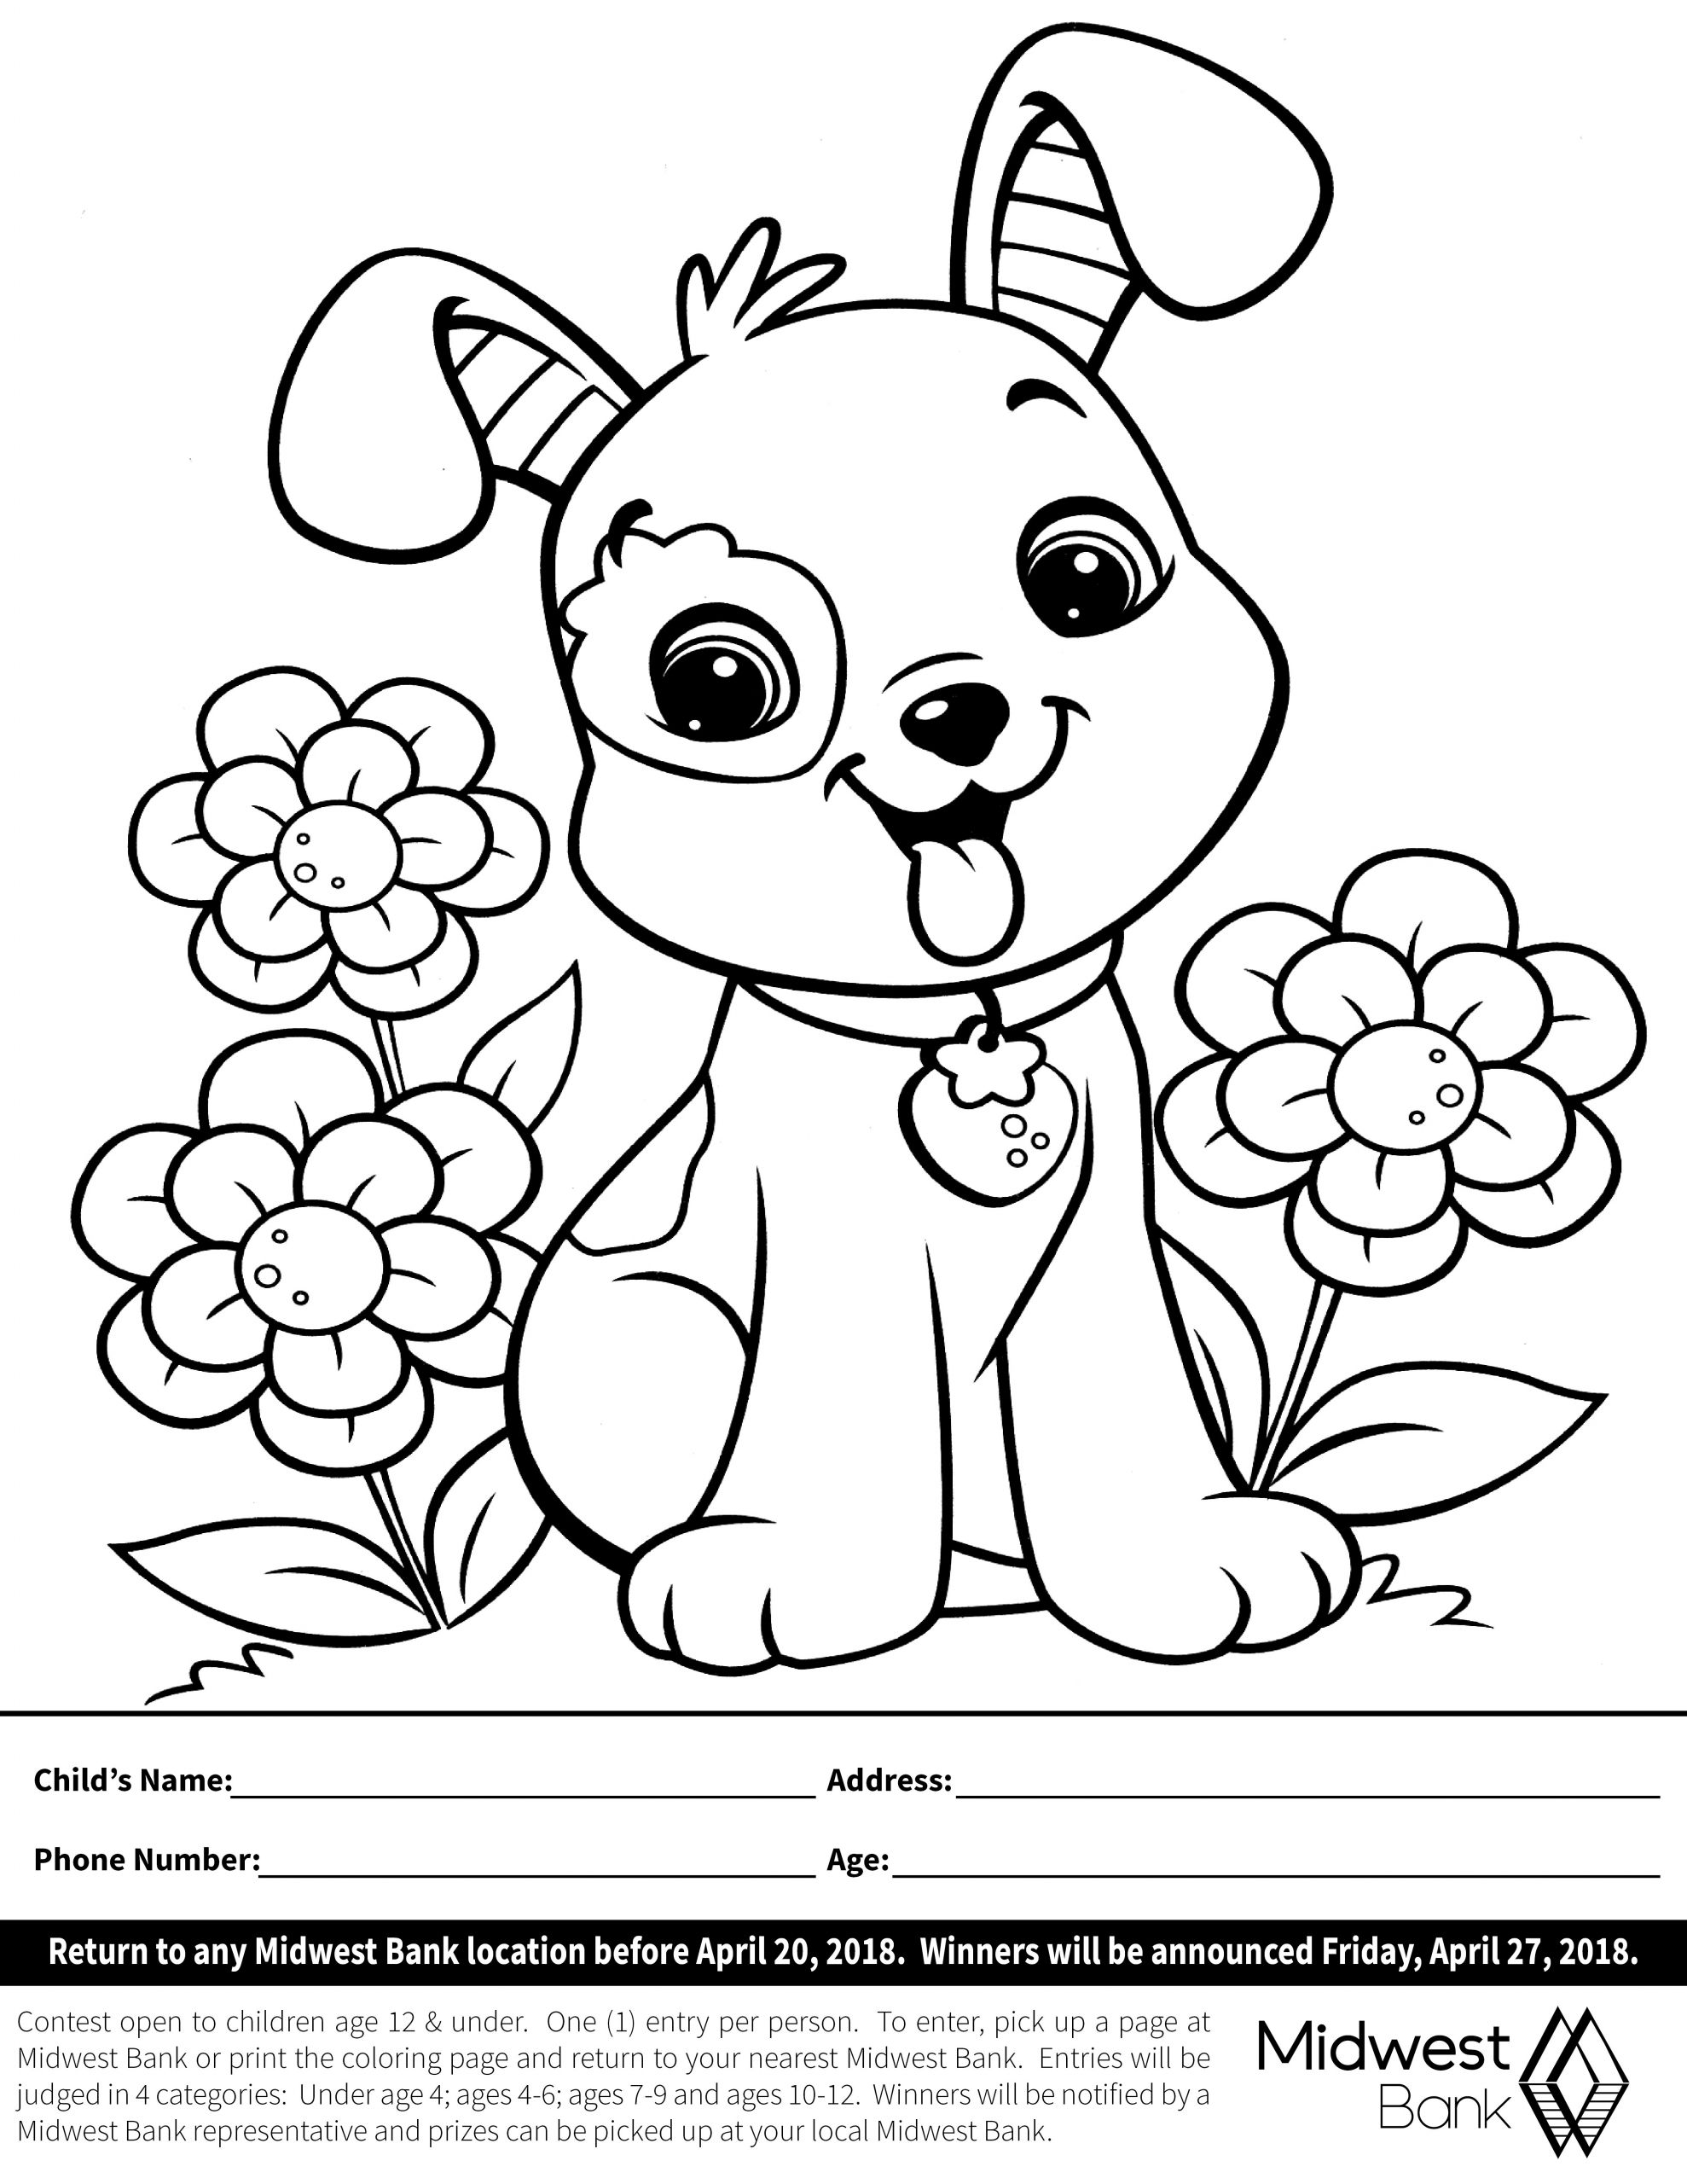 the-best-kids-coloring-contest-home-family-style-and-art-ideas